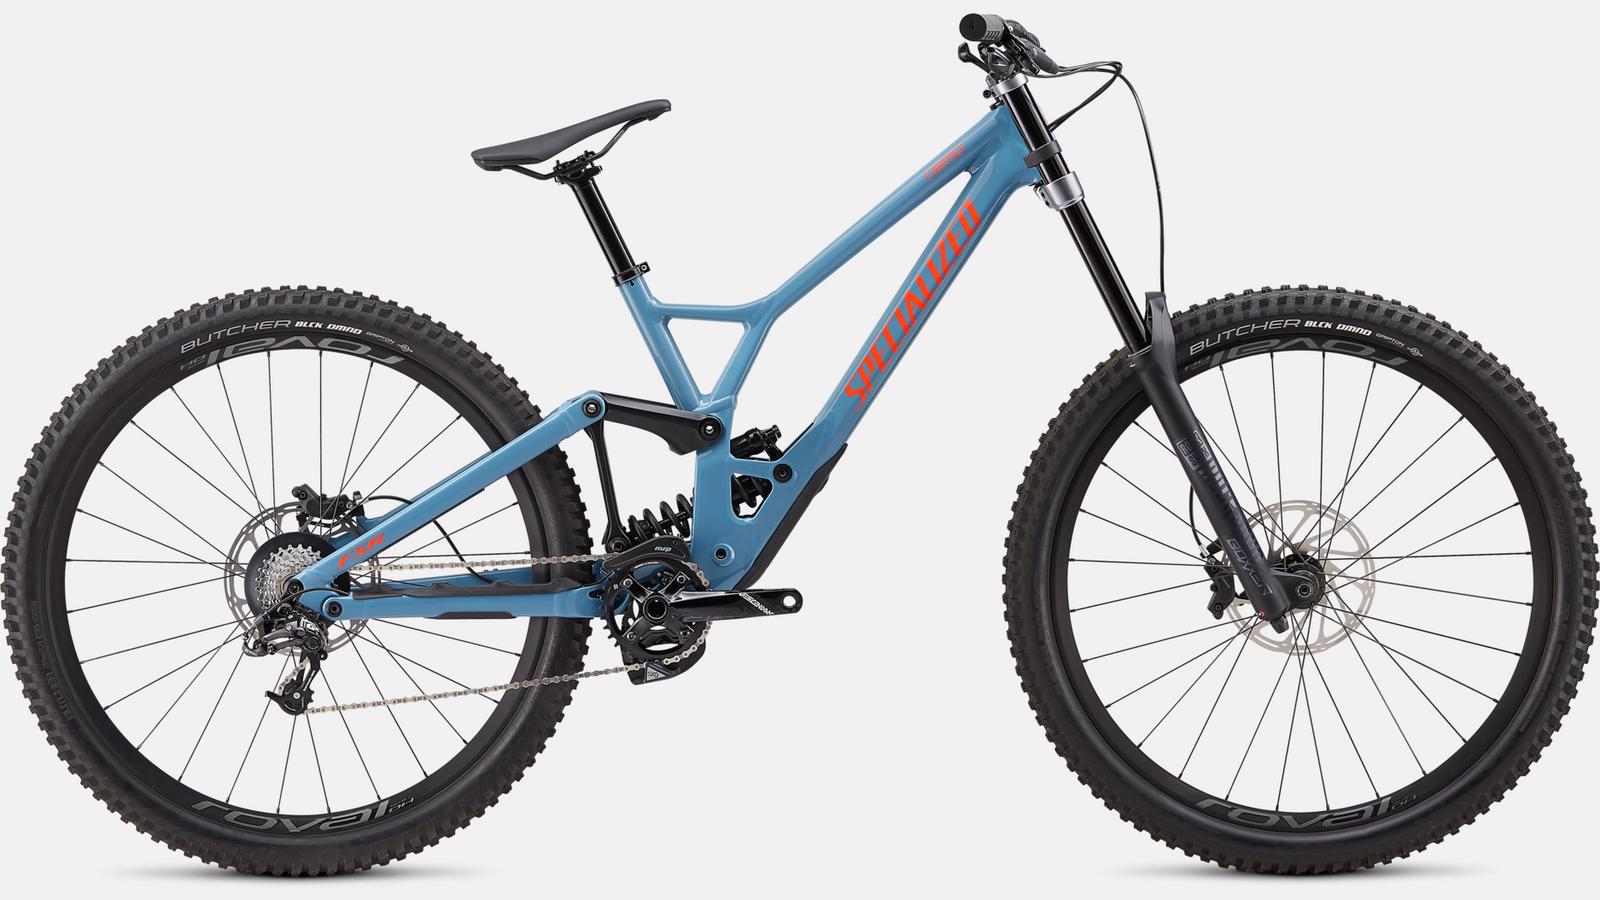 Touch-up paint for 2019 Specialized Demo Expert 29 - Gloss Storm Grey